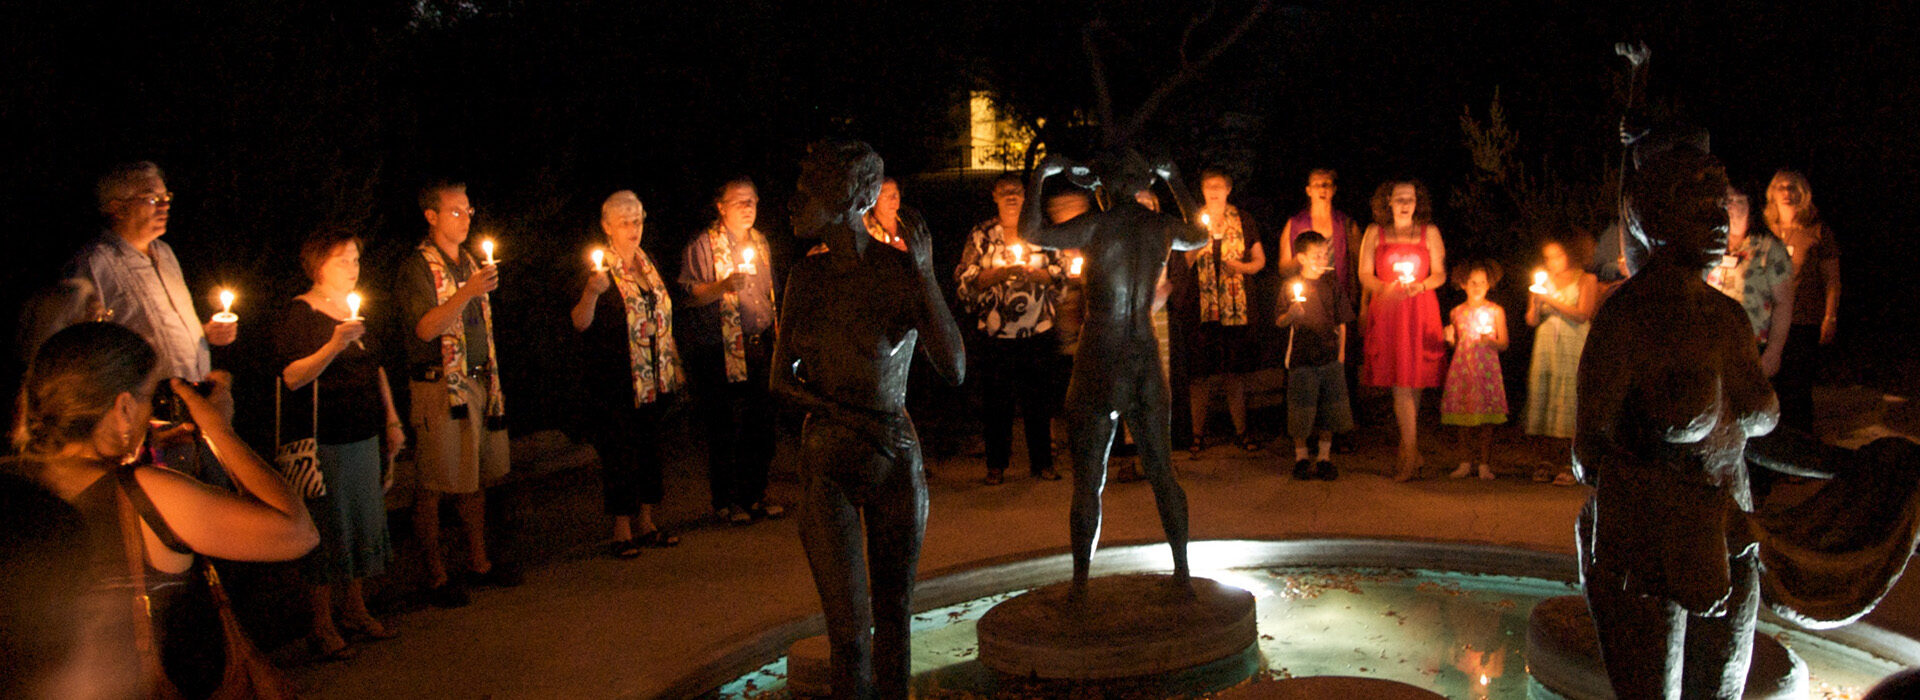 Congregants holding lighted candles in Statuary garden